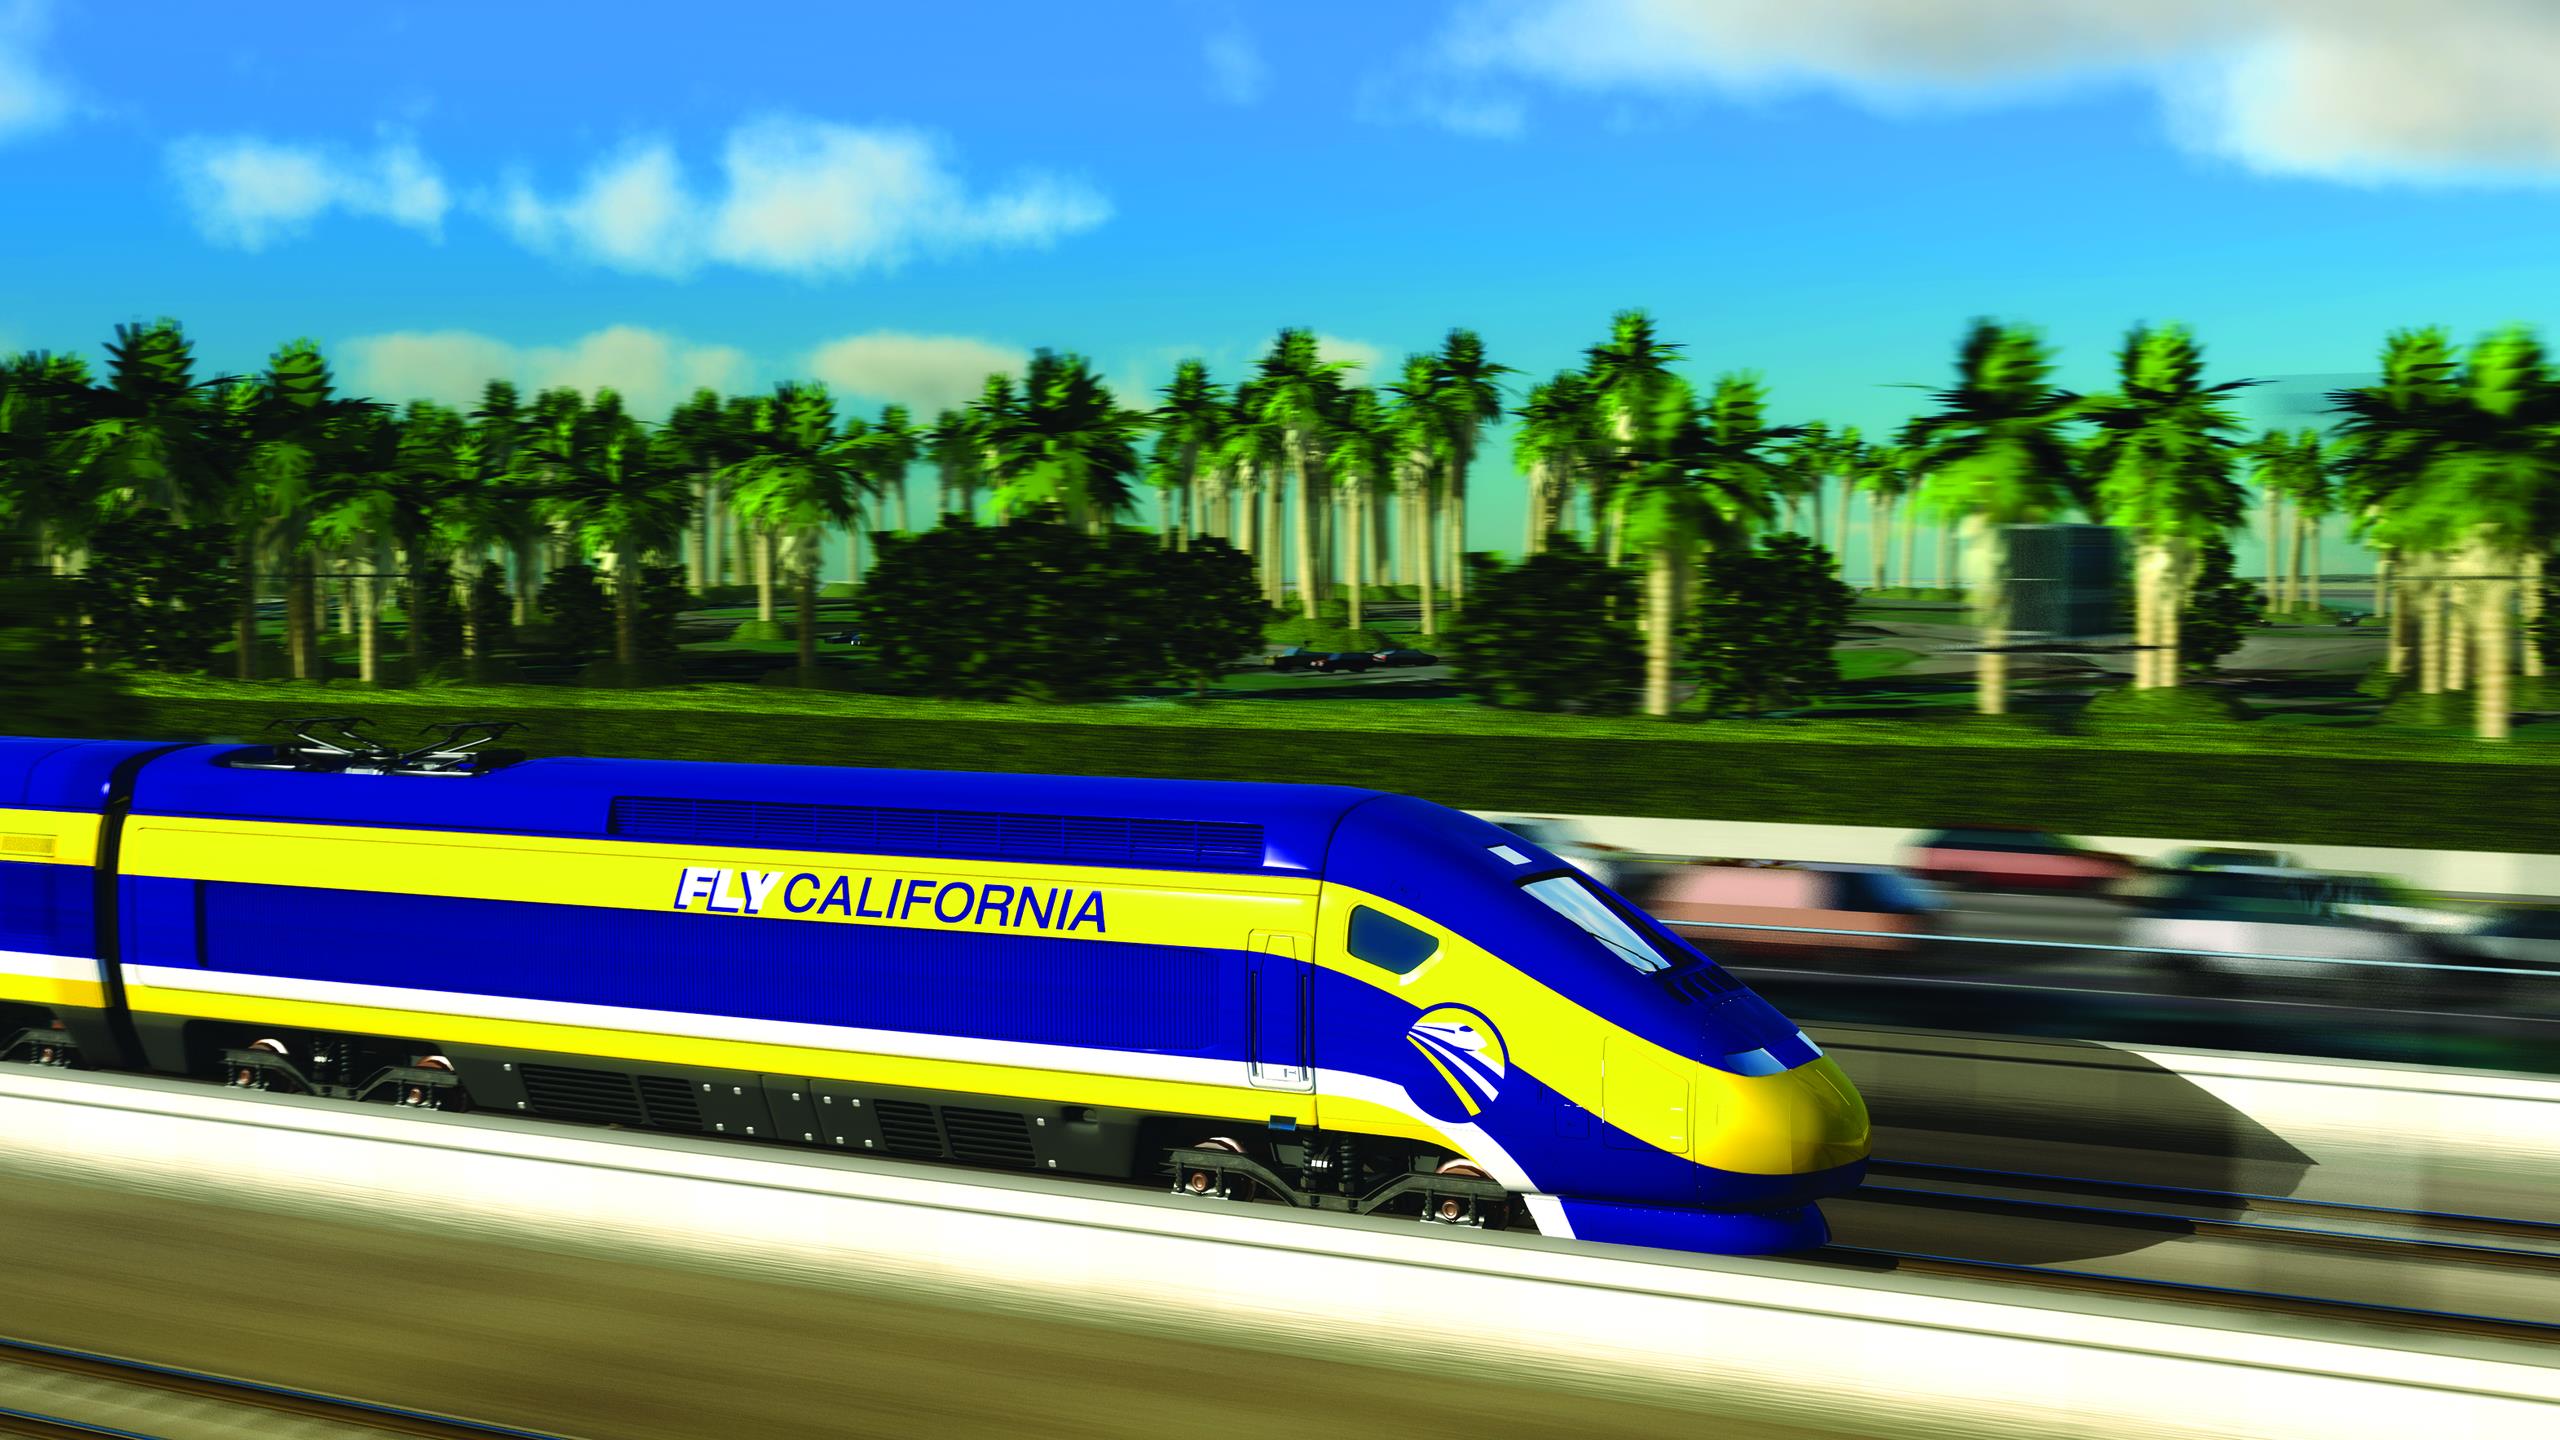 Computerized image of a train on the California high-speed rail